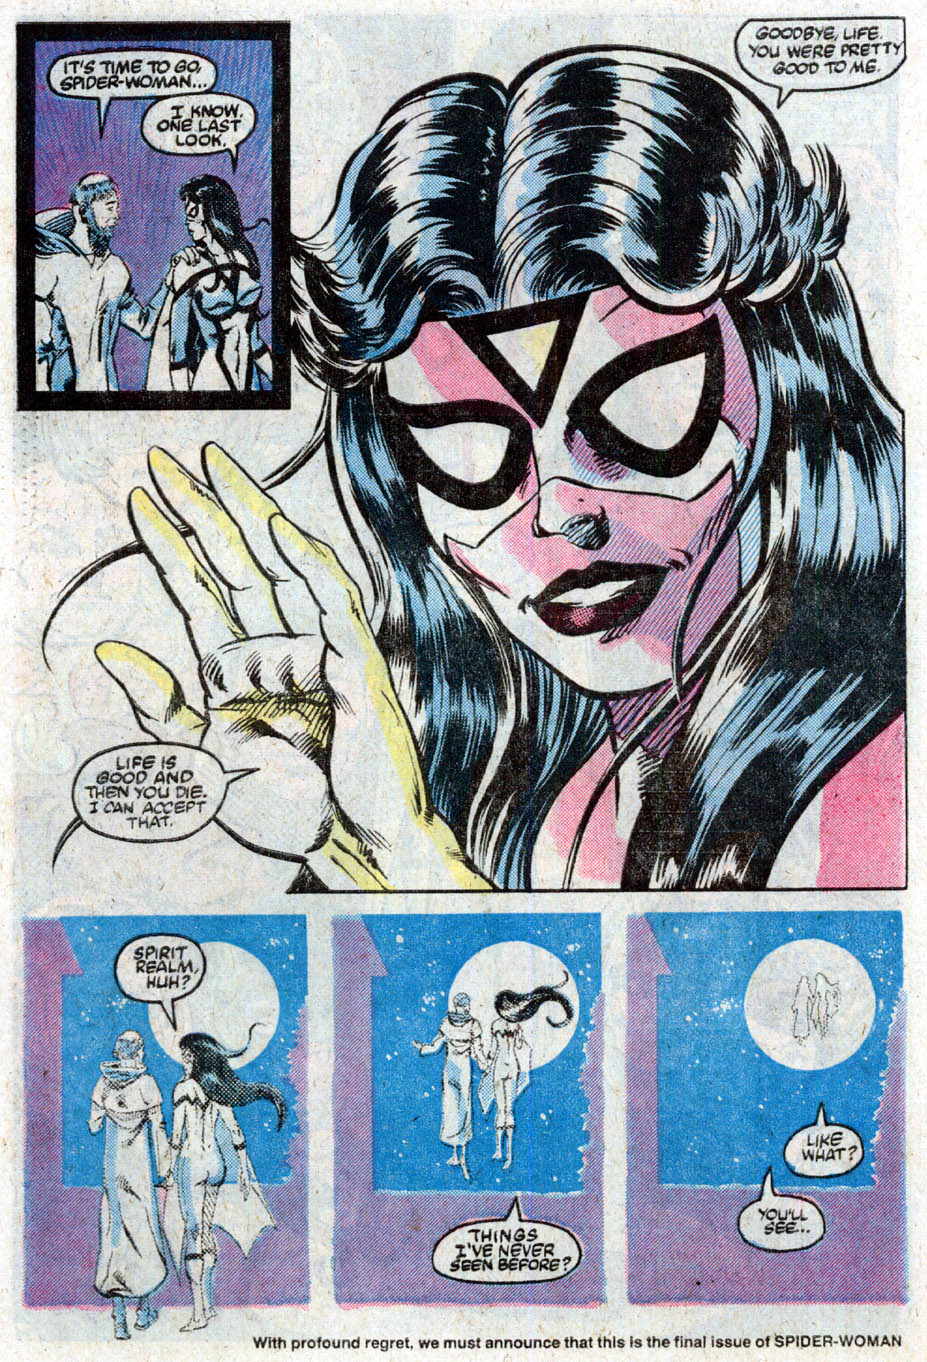 Marvel Comics of the 1980s: Guest Blog: A Spider-Woman for the 1980s Part 2